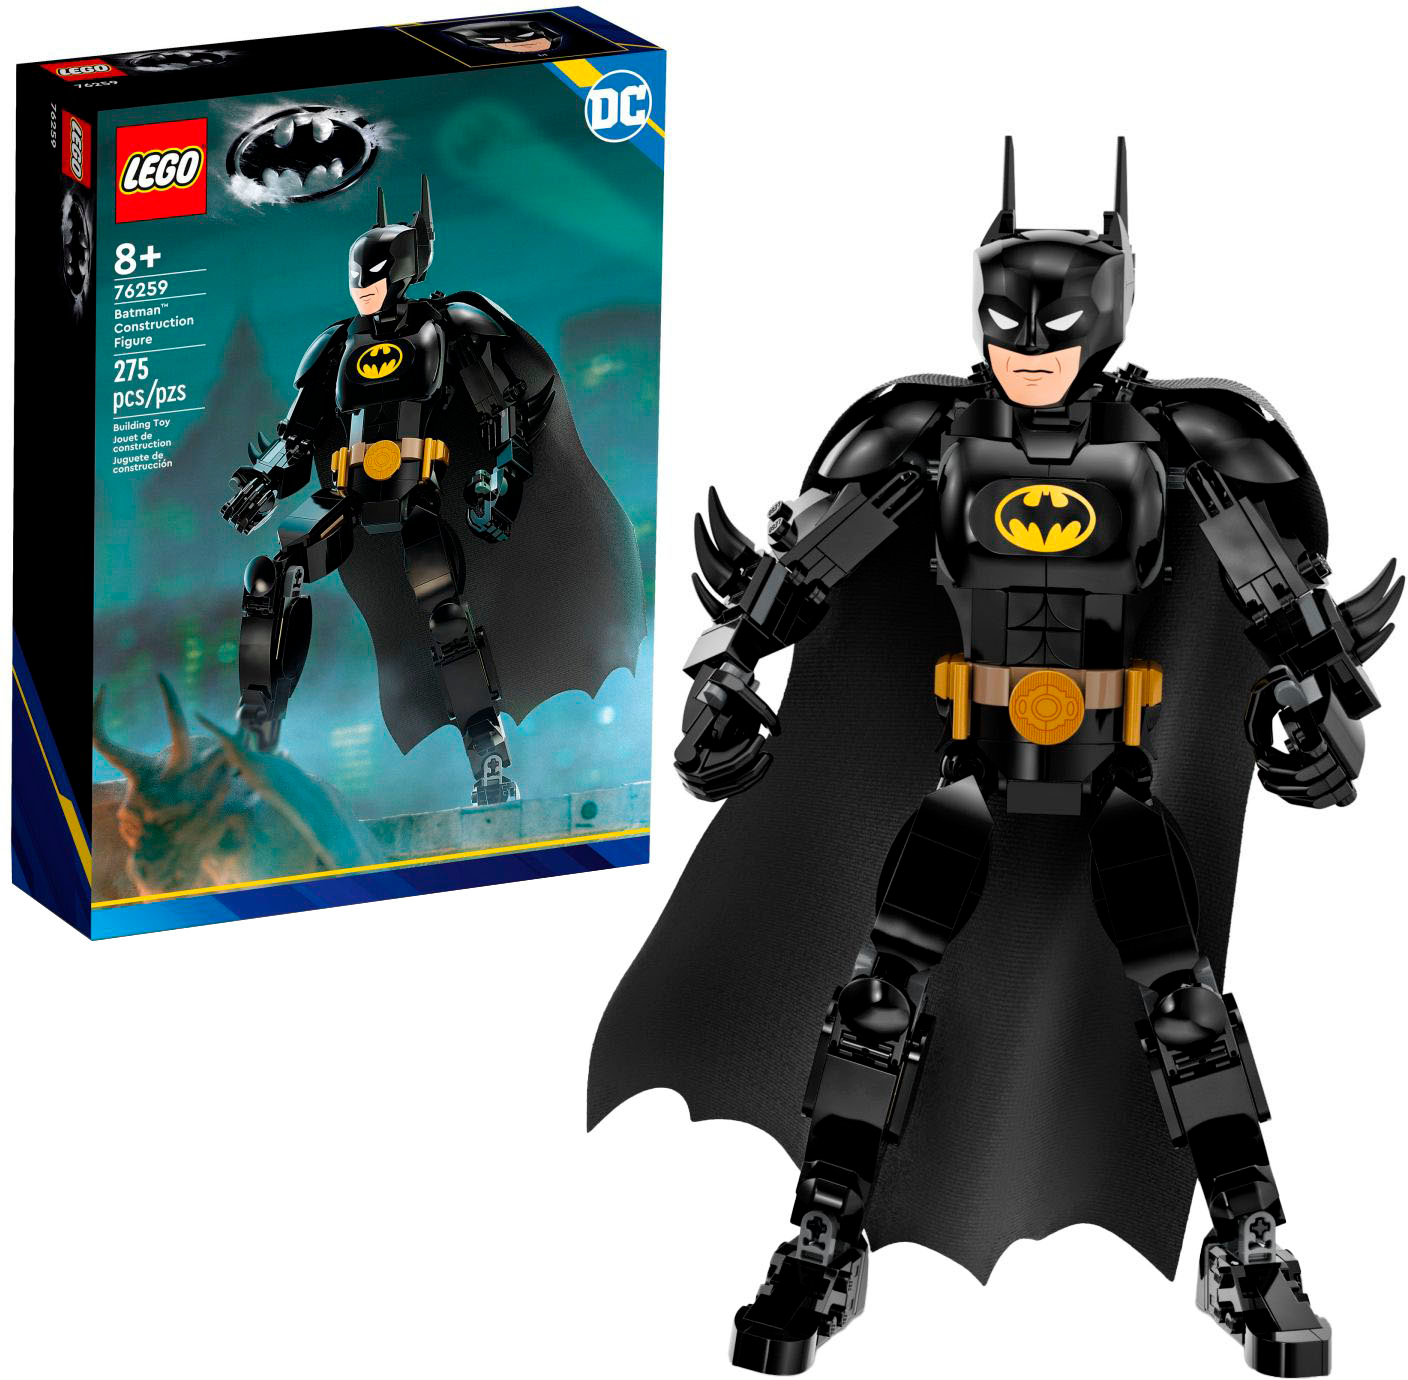 Lego Batman Movie Top 5 Biggest Sets of all Time - Lego Speed